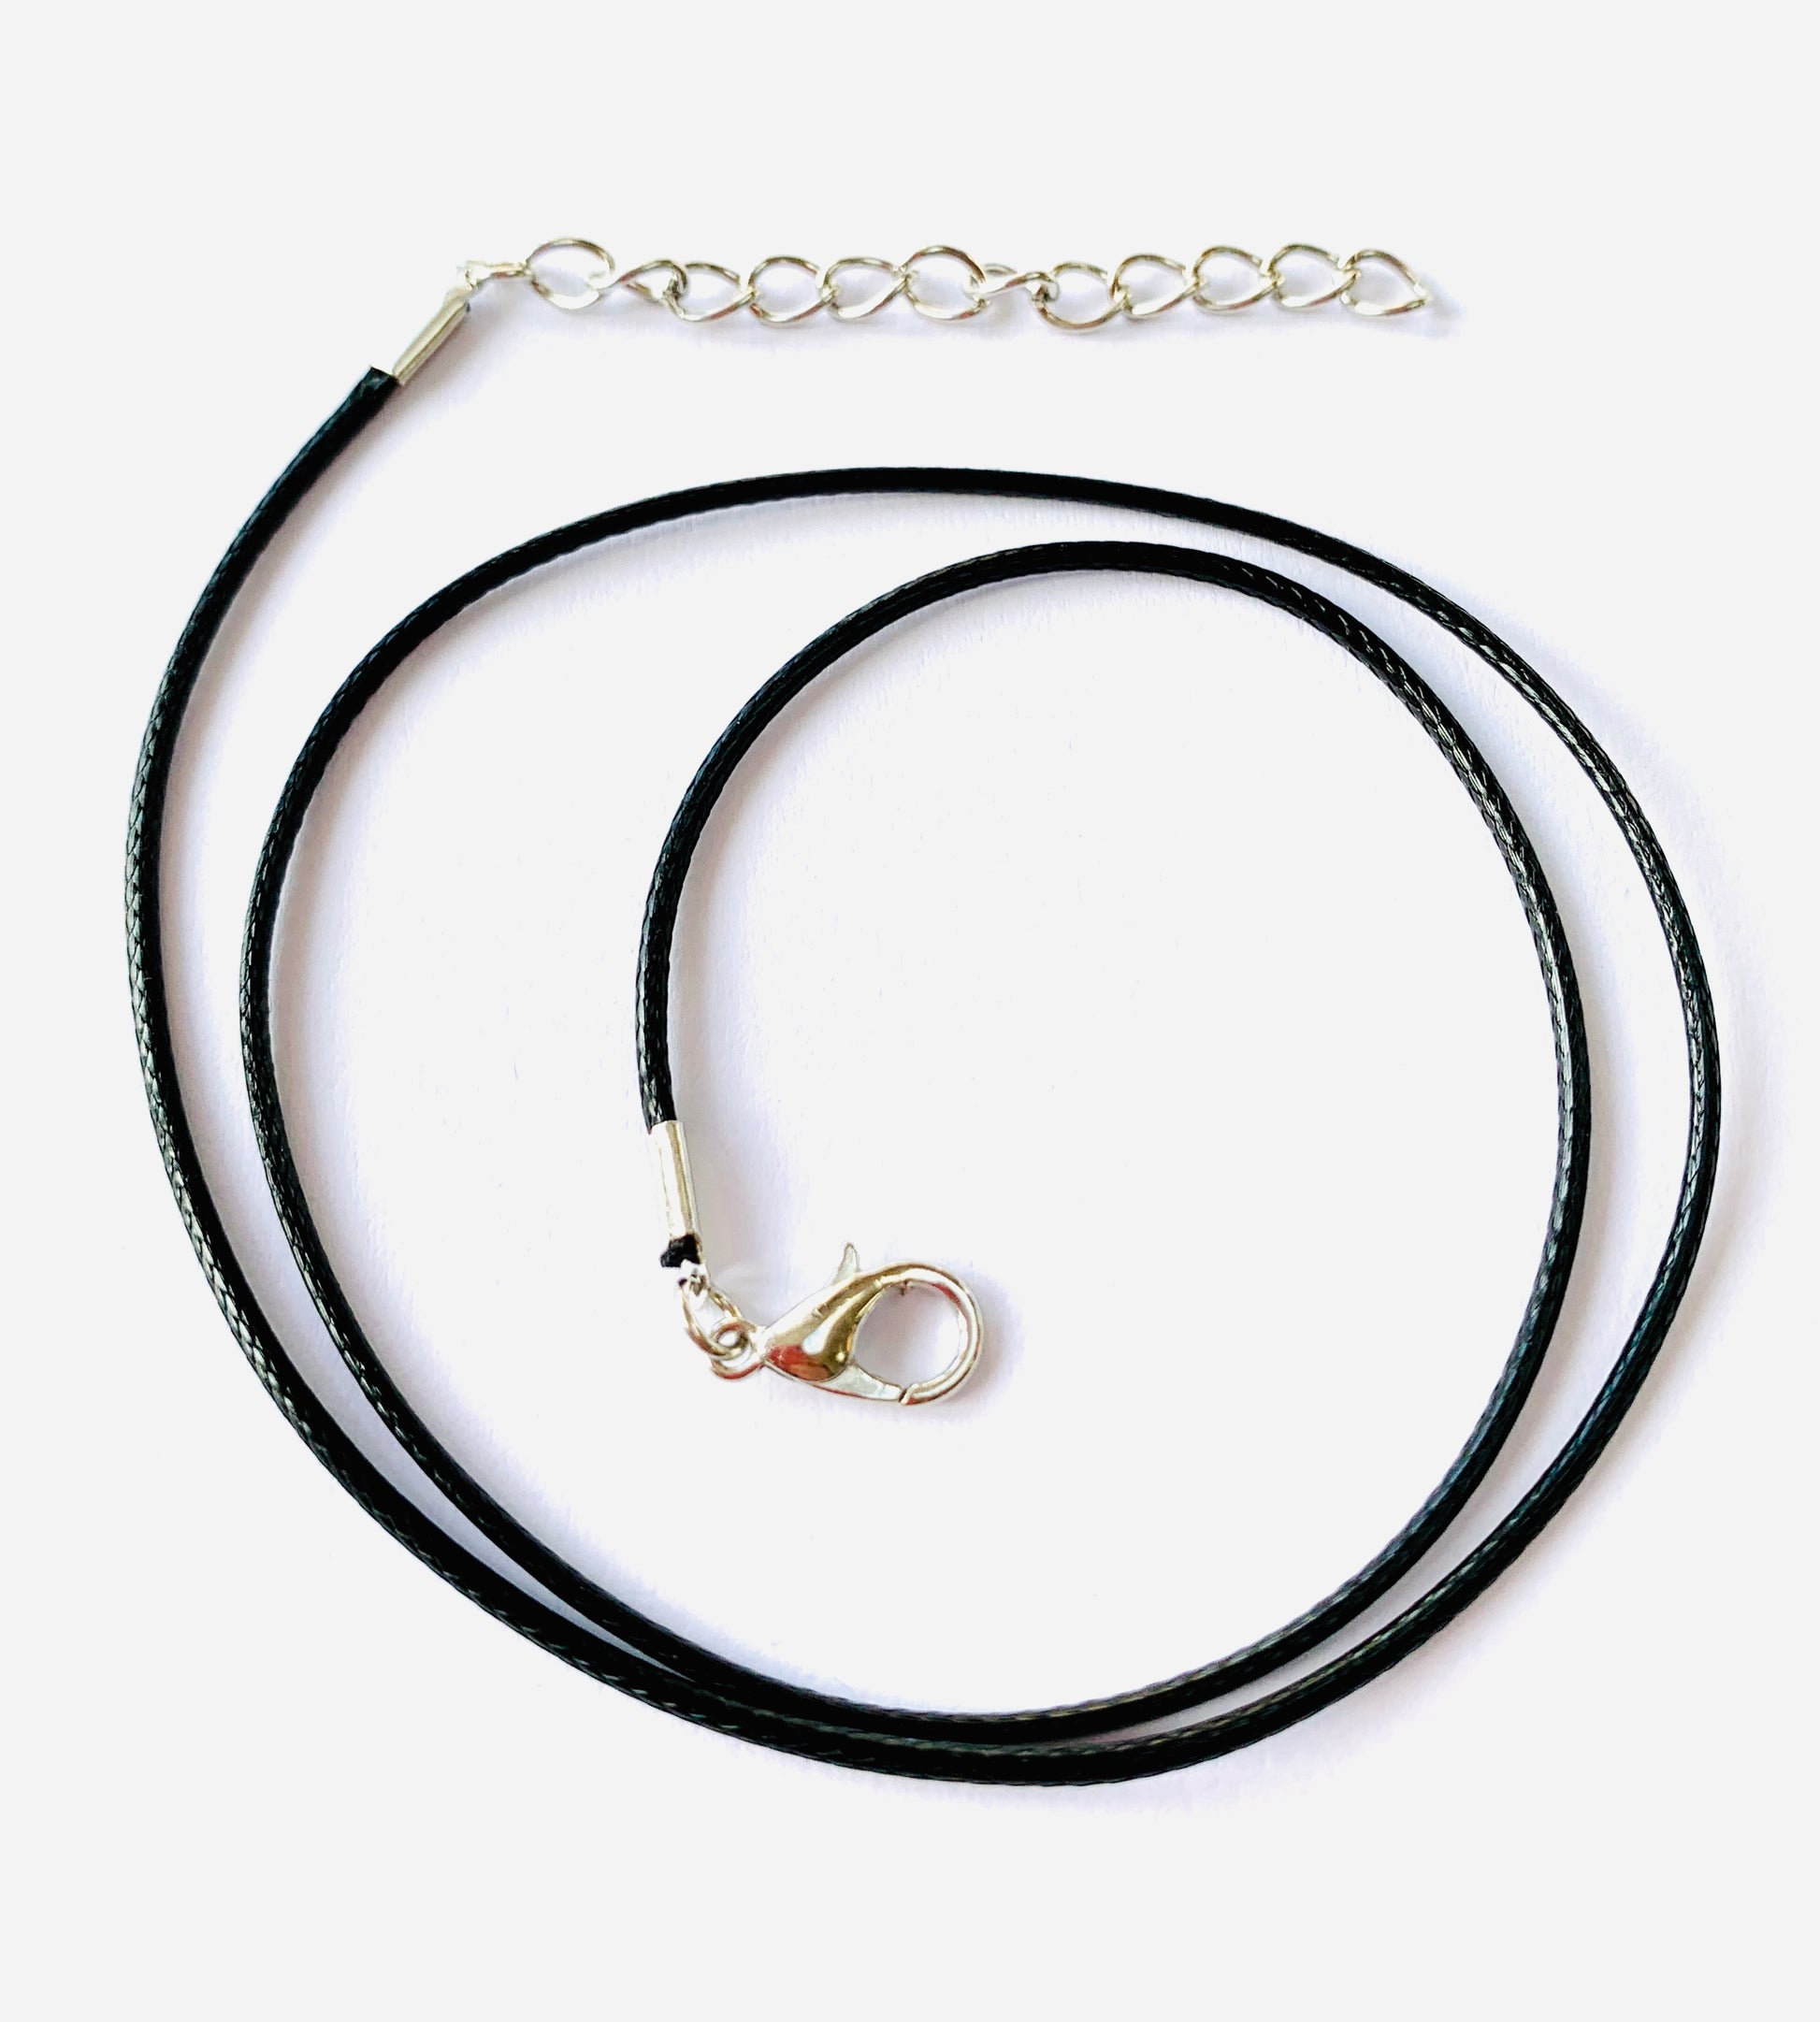 Soft Leather Corded Necklace 16.5" - Crystal Boutique.co.uk